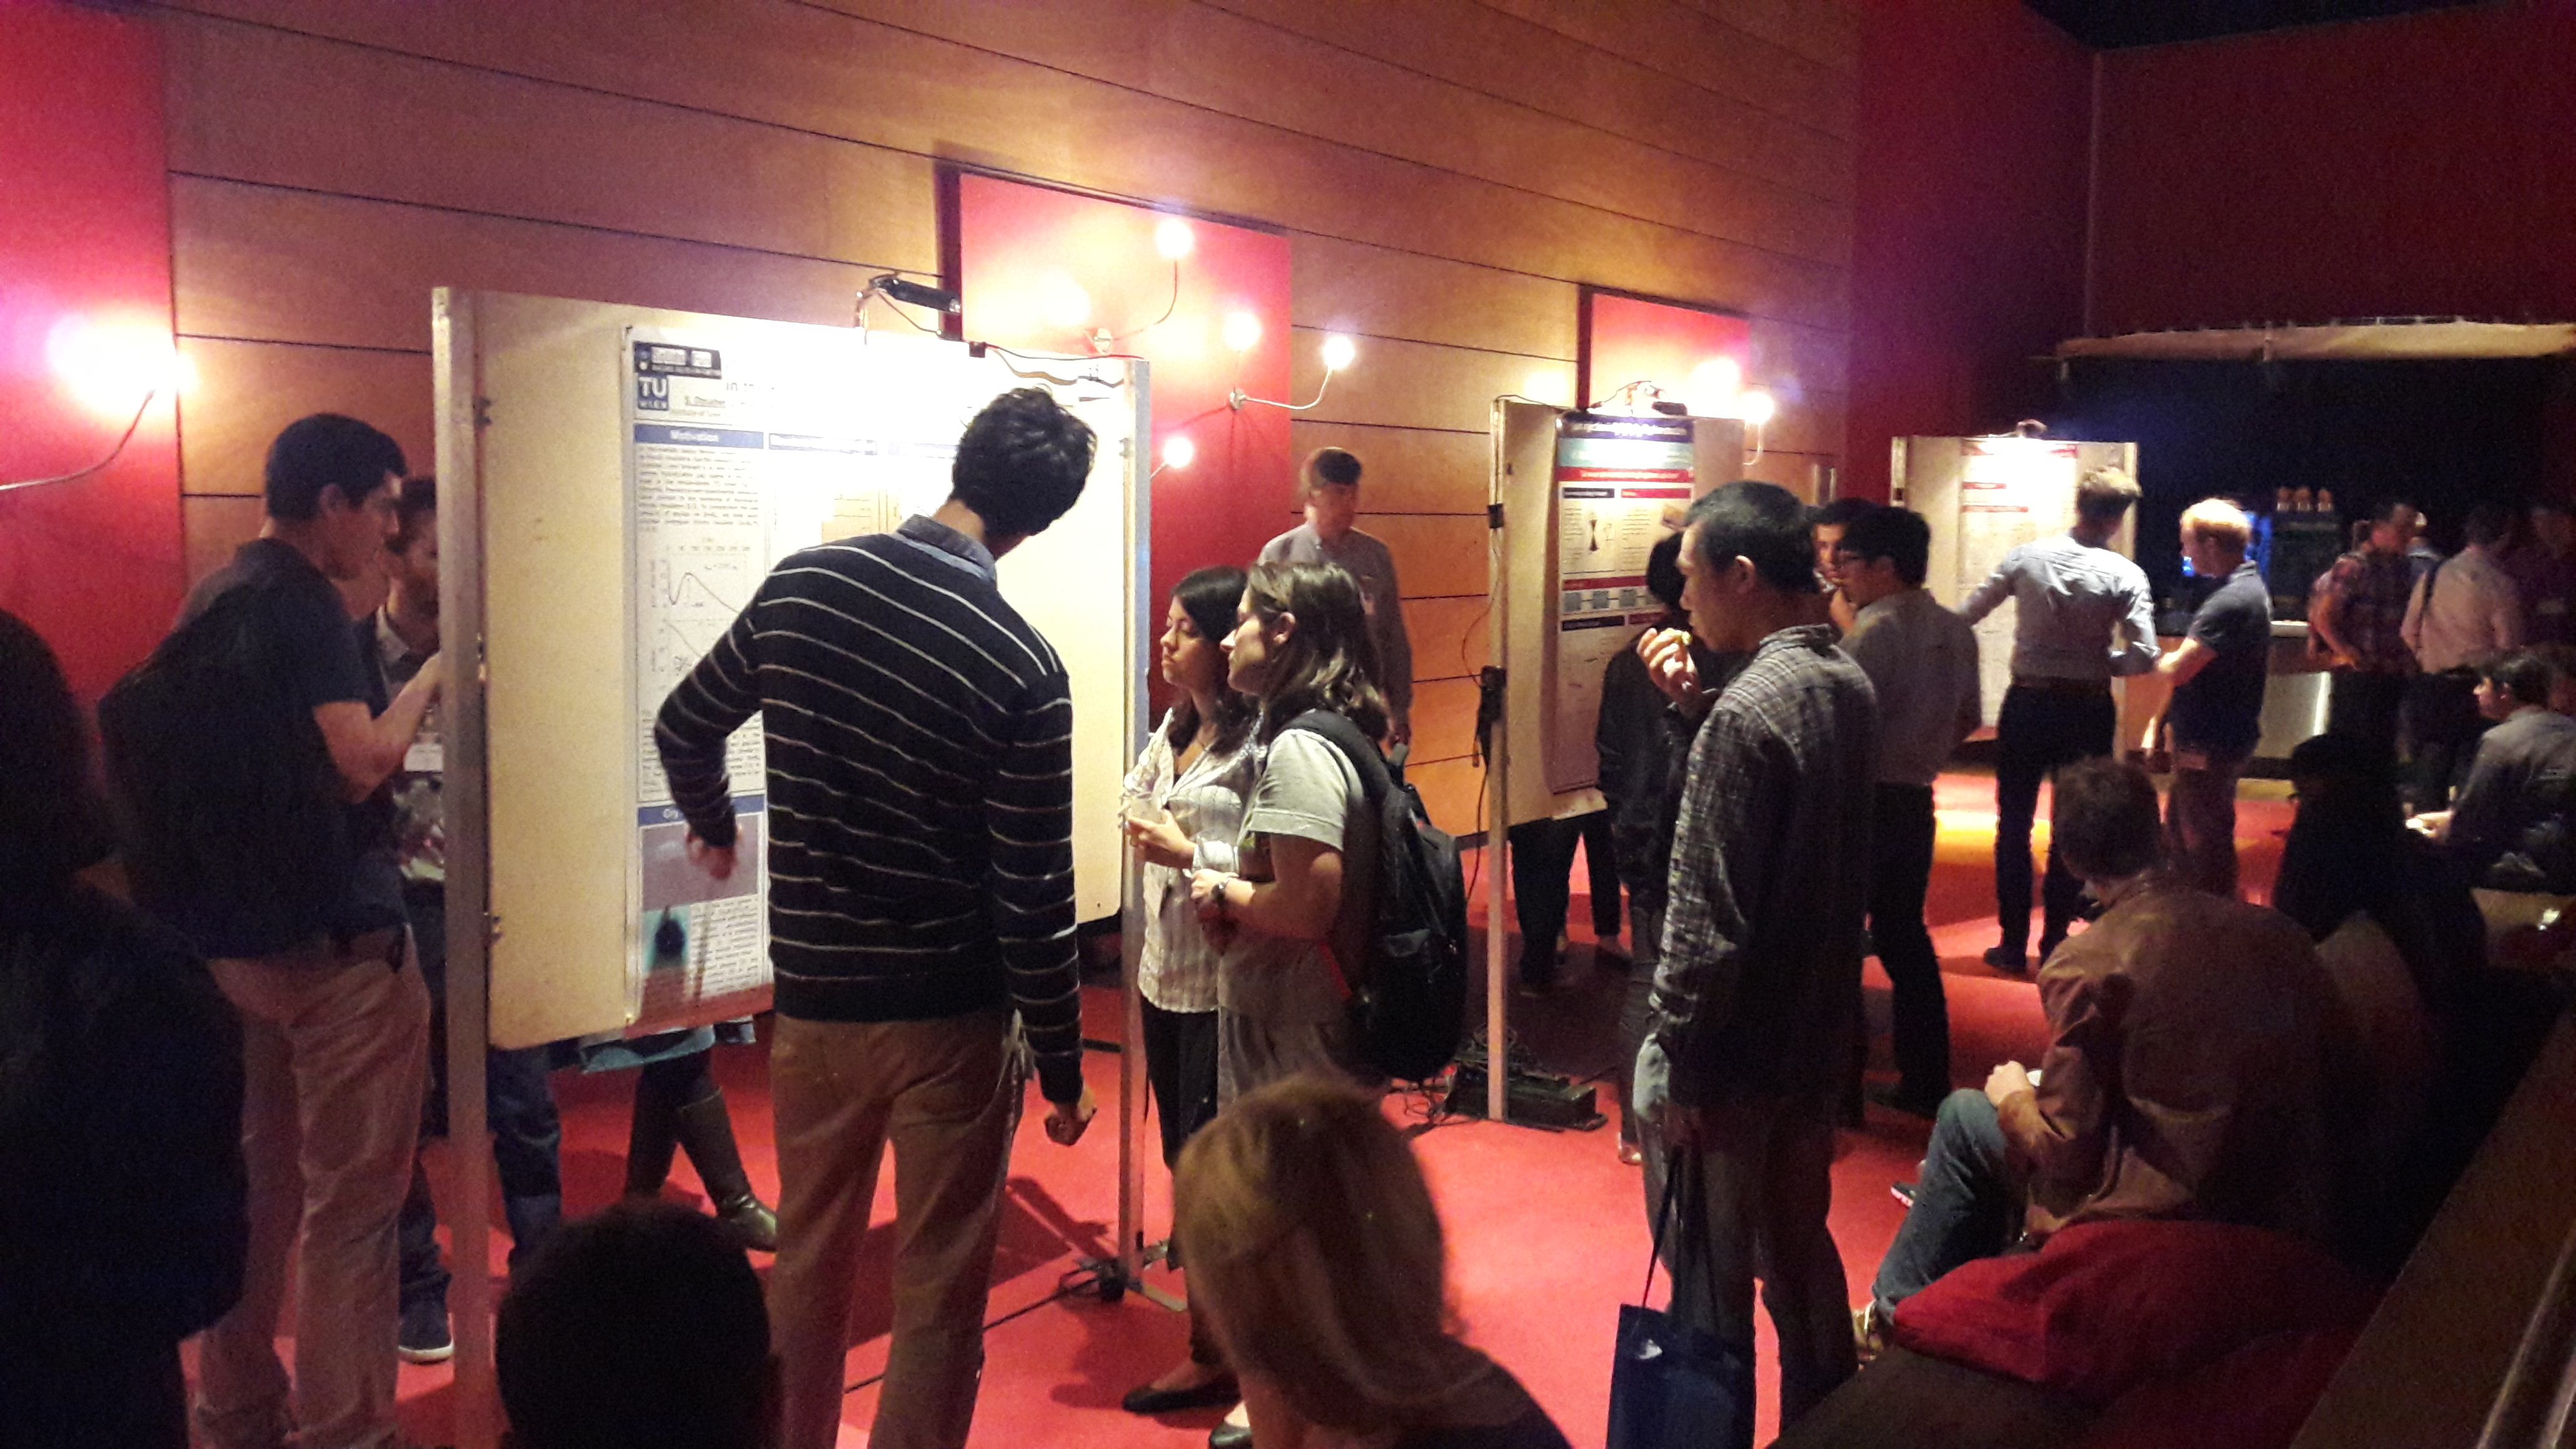 The CMD26 poster session